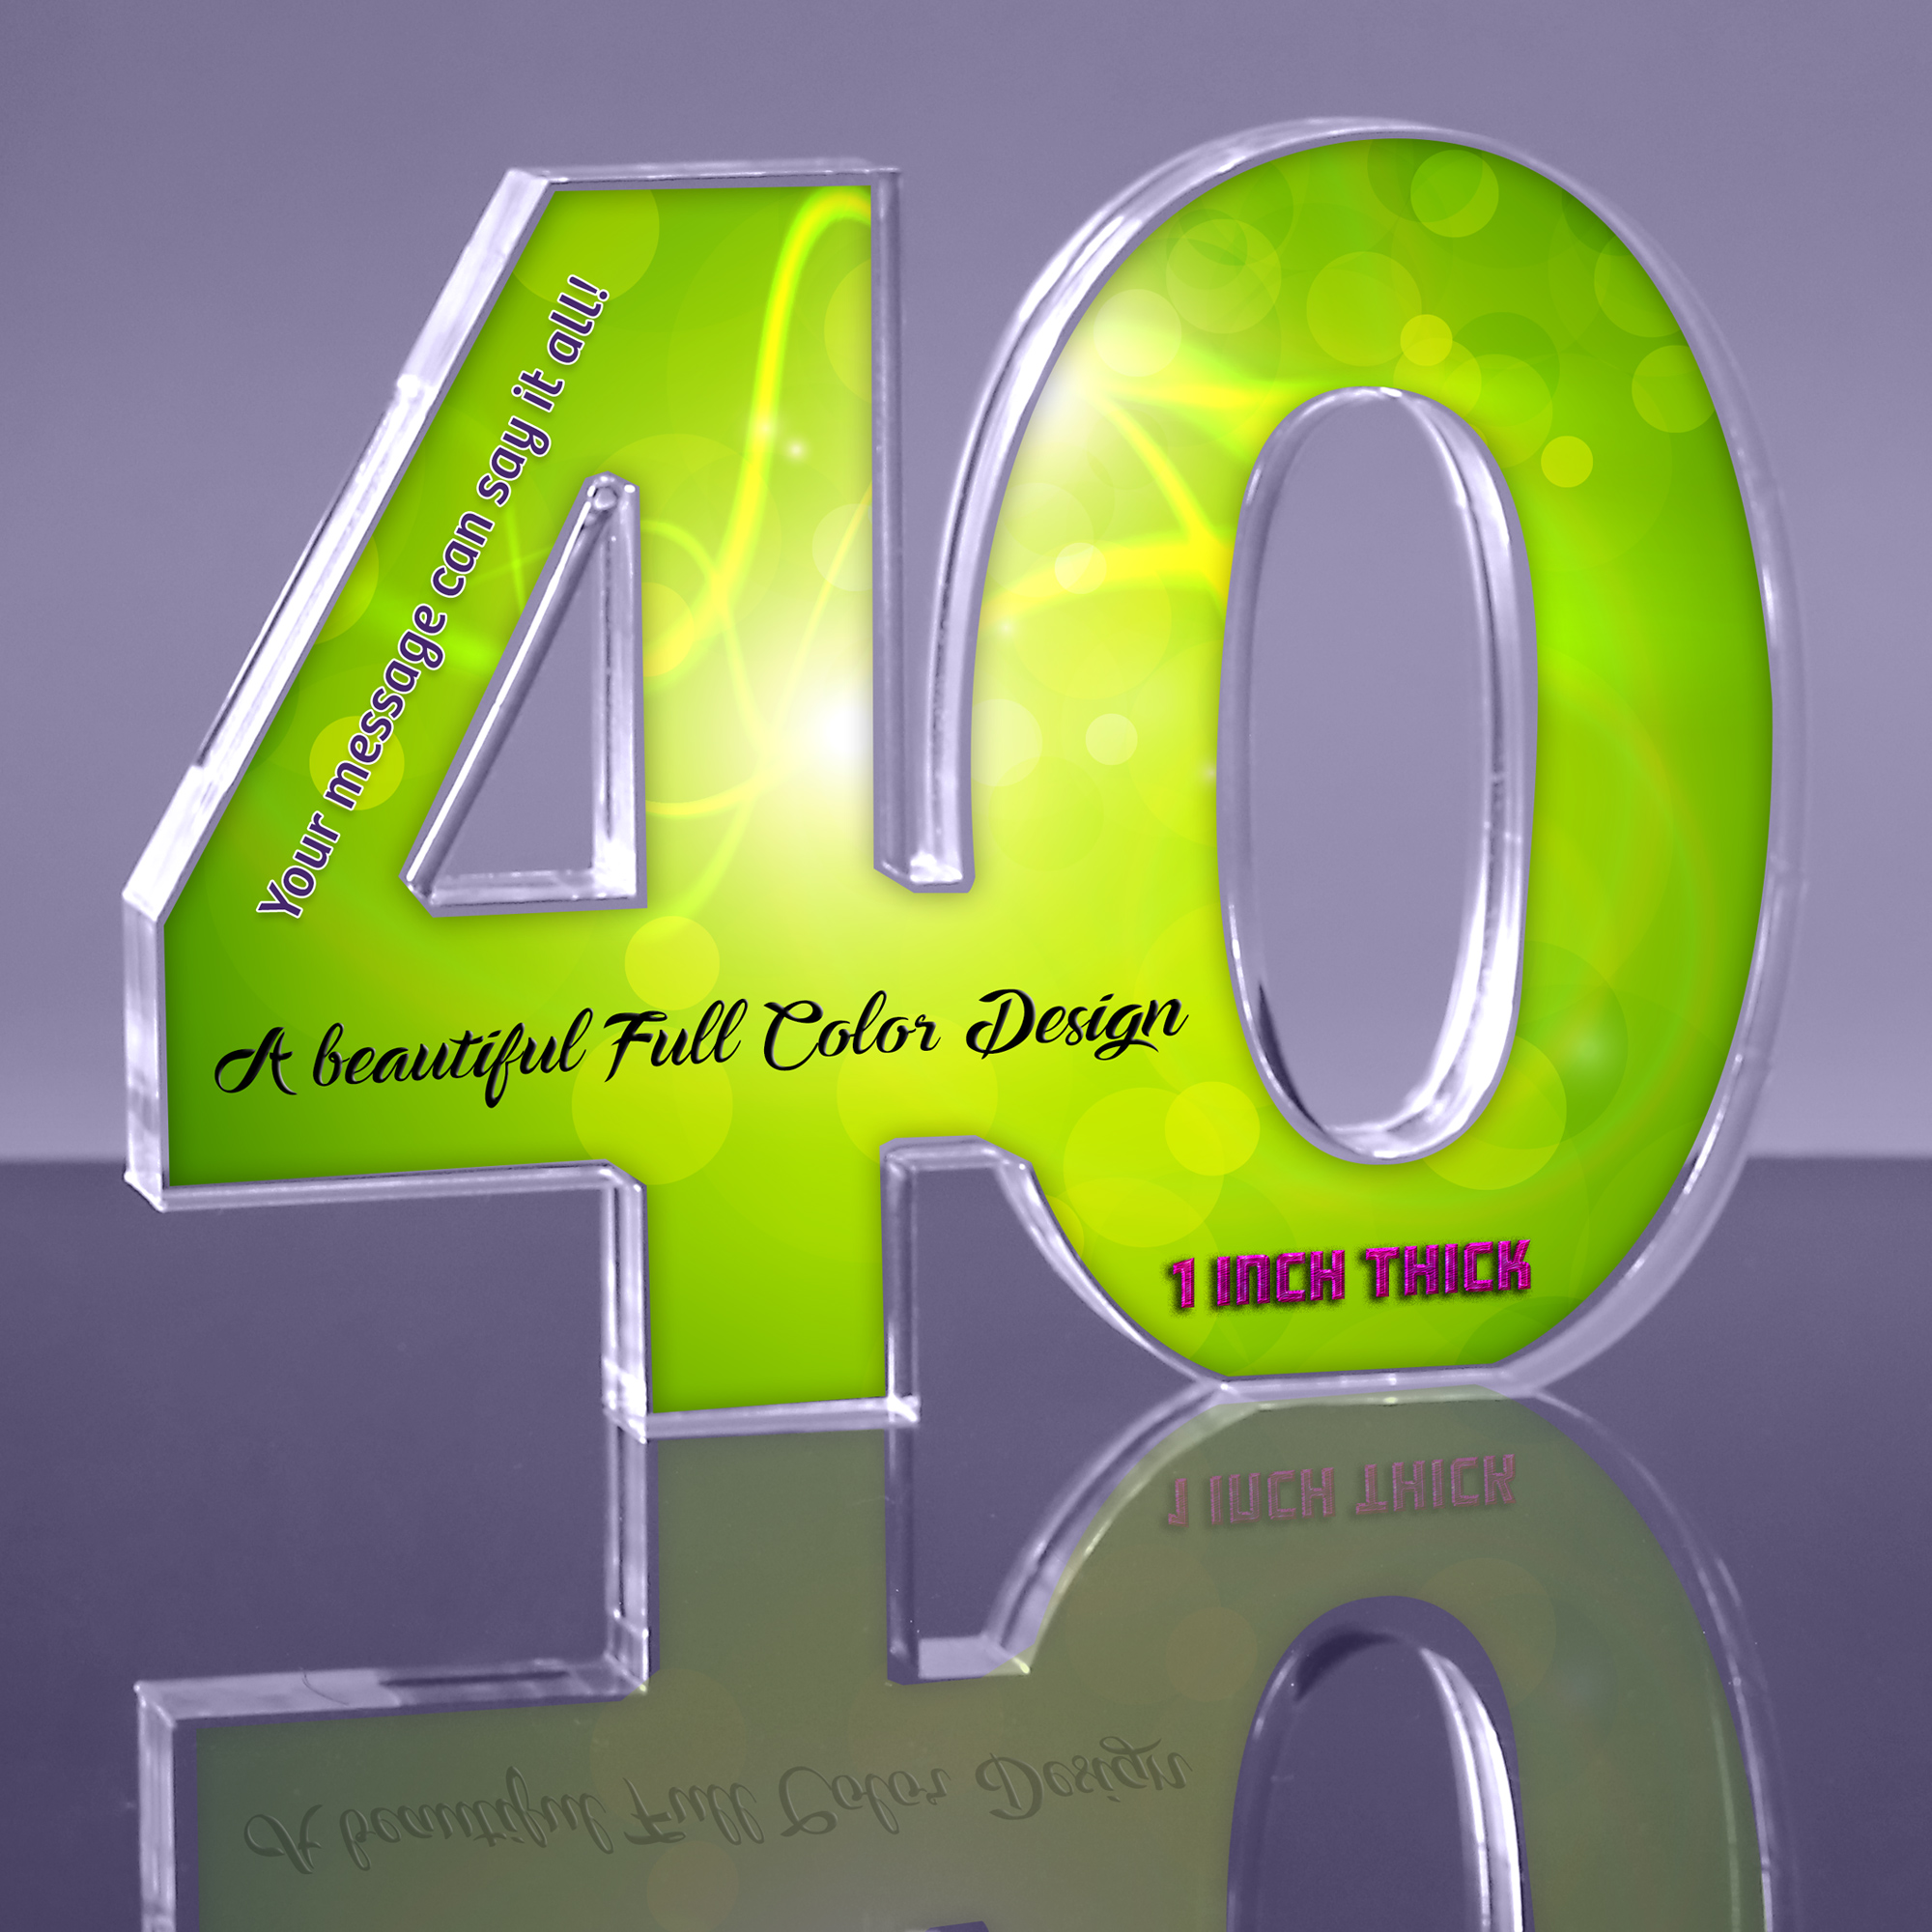 40 Color Acrylic Award - 6.5 x 9 x 1 inch Thick